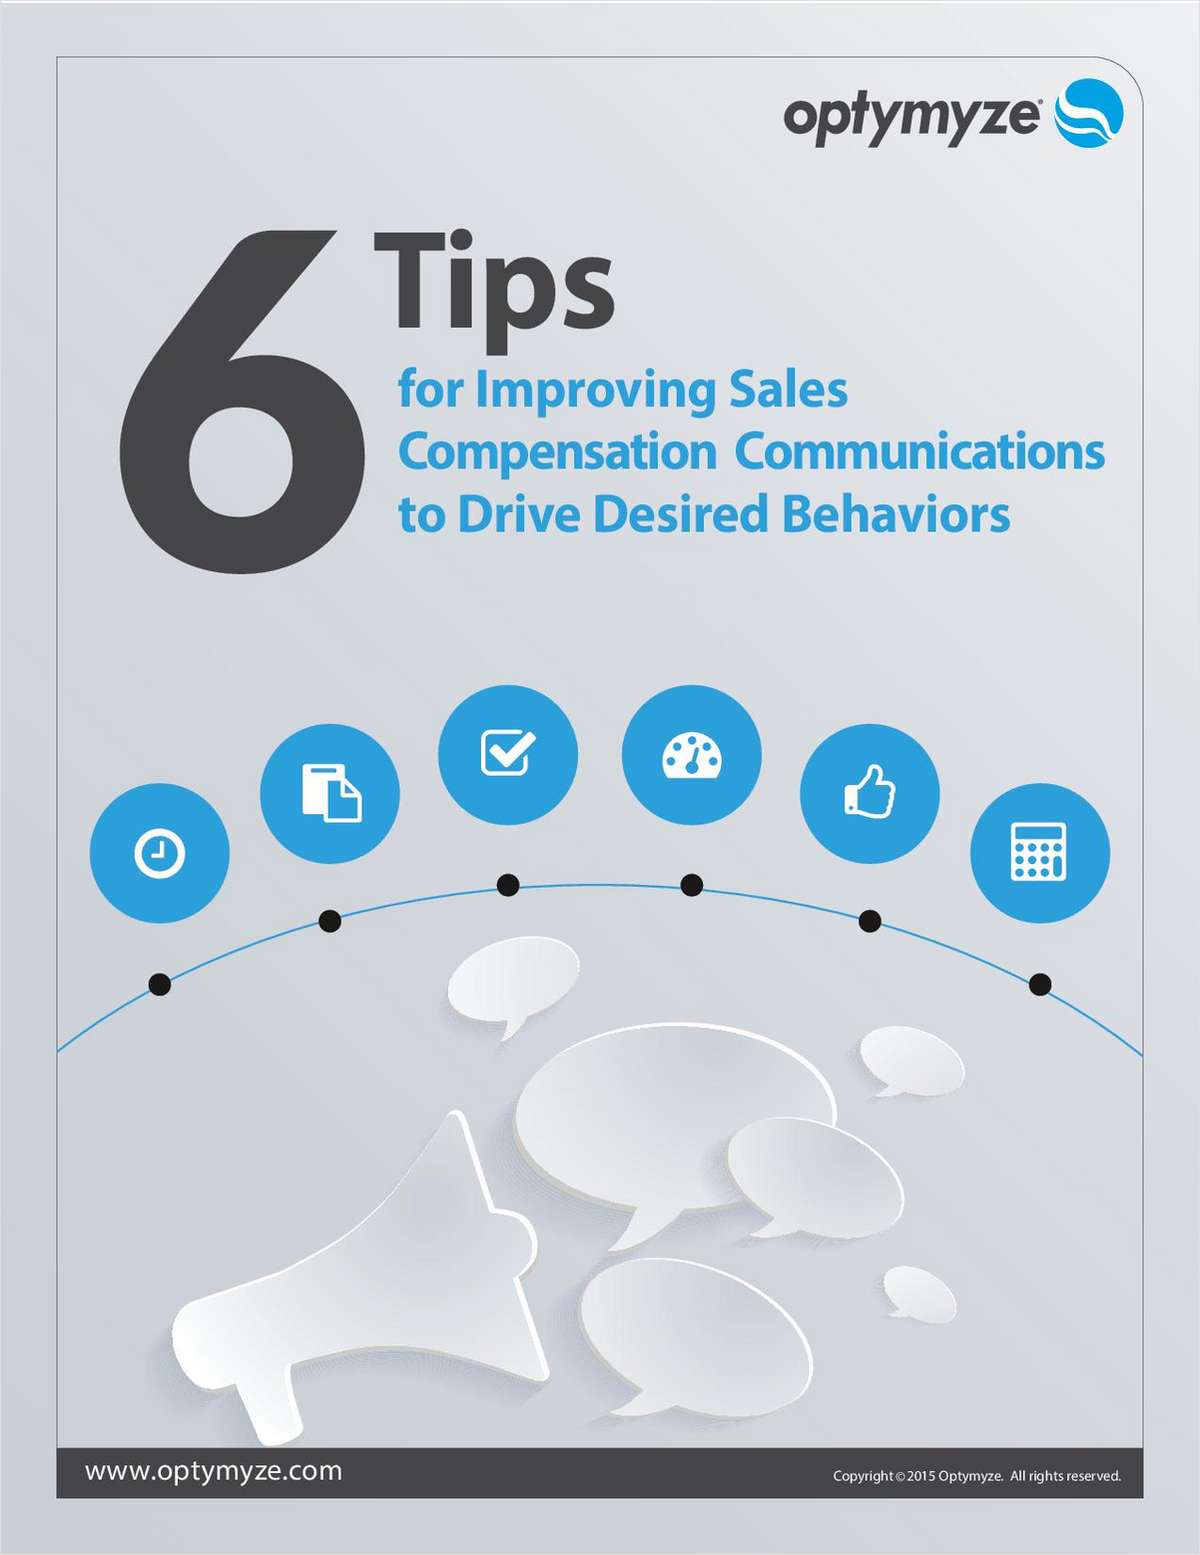 6 Tips for Improving Sales Compensation Communications to Drive Desired Behaviors